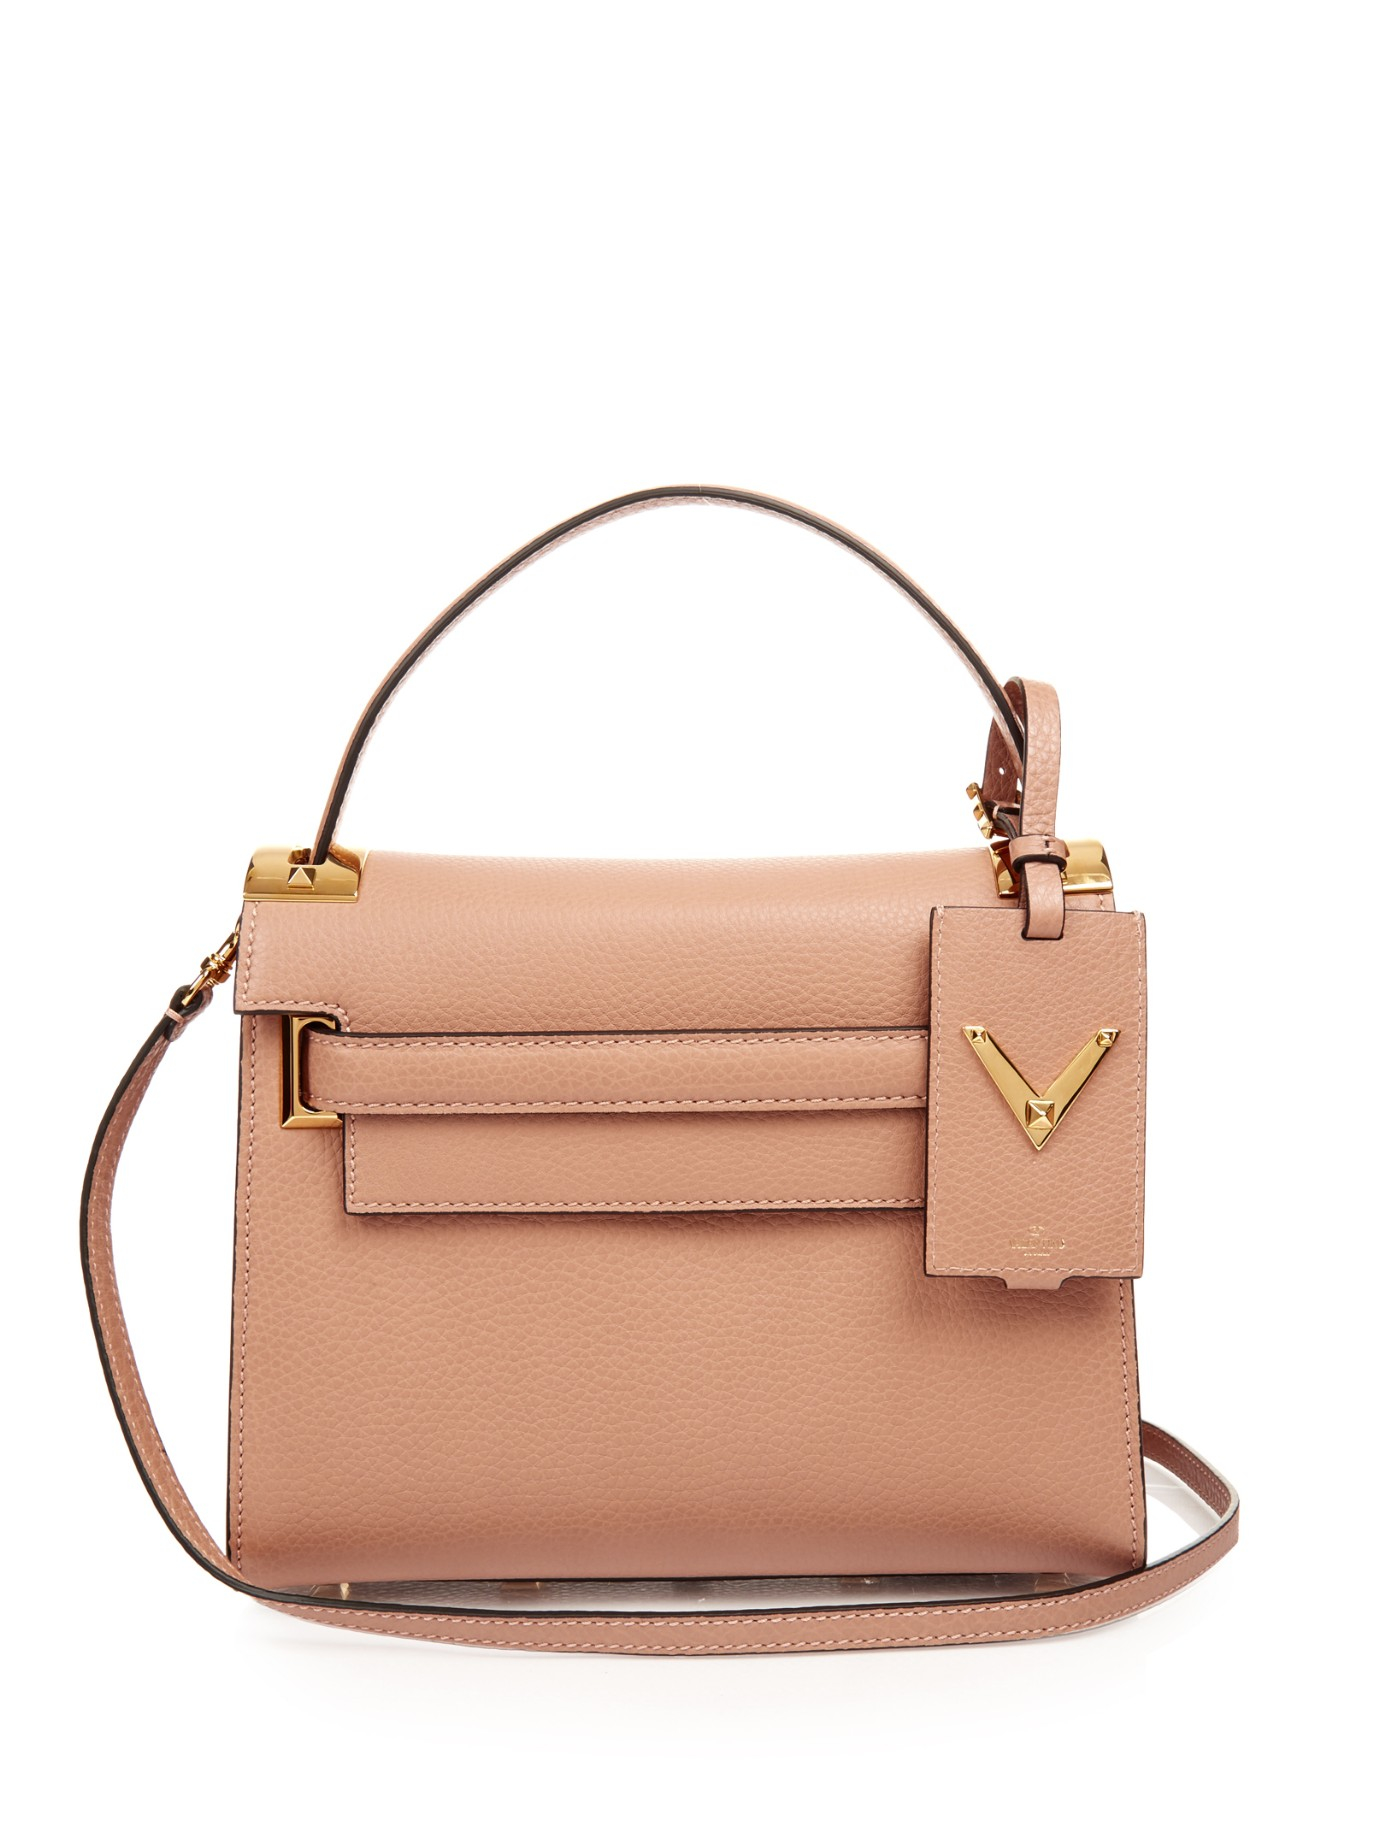 Valentino My Rockstud Small Leather Bag in Natural | Lyst